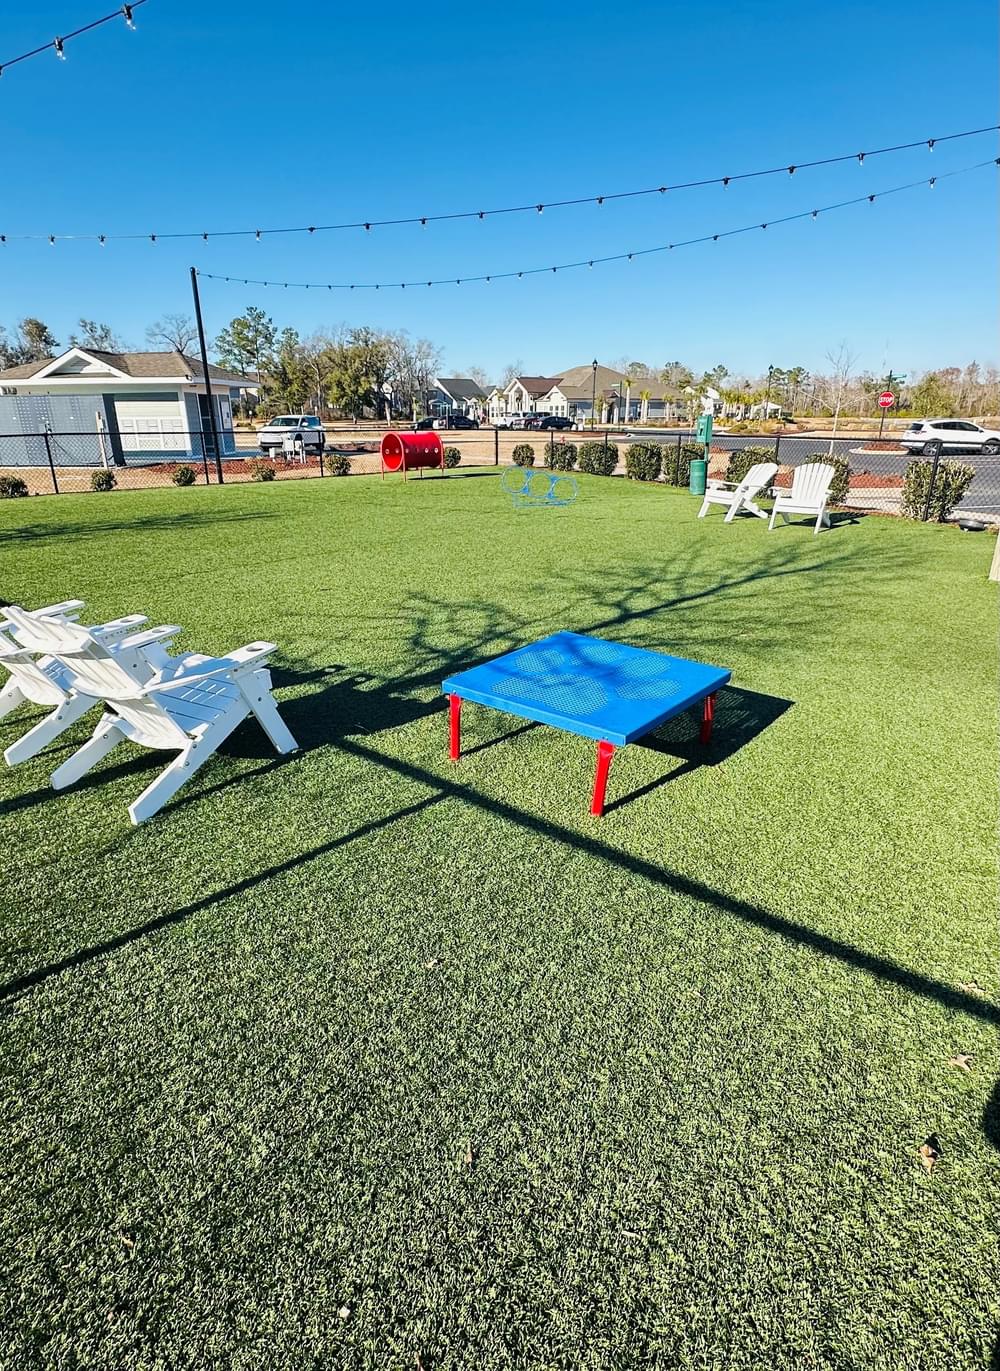 a blue ping pong table on the grass next to chairs